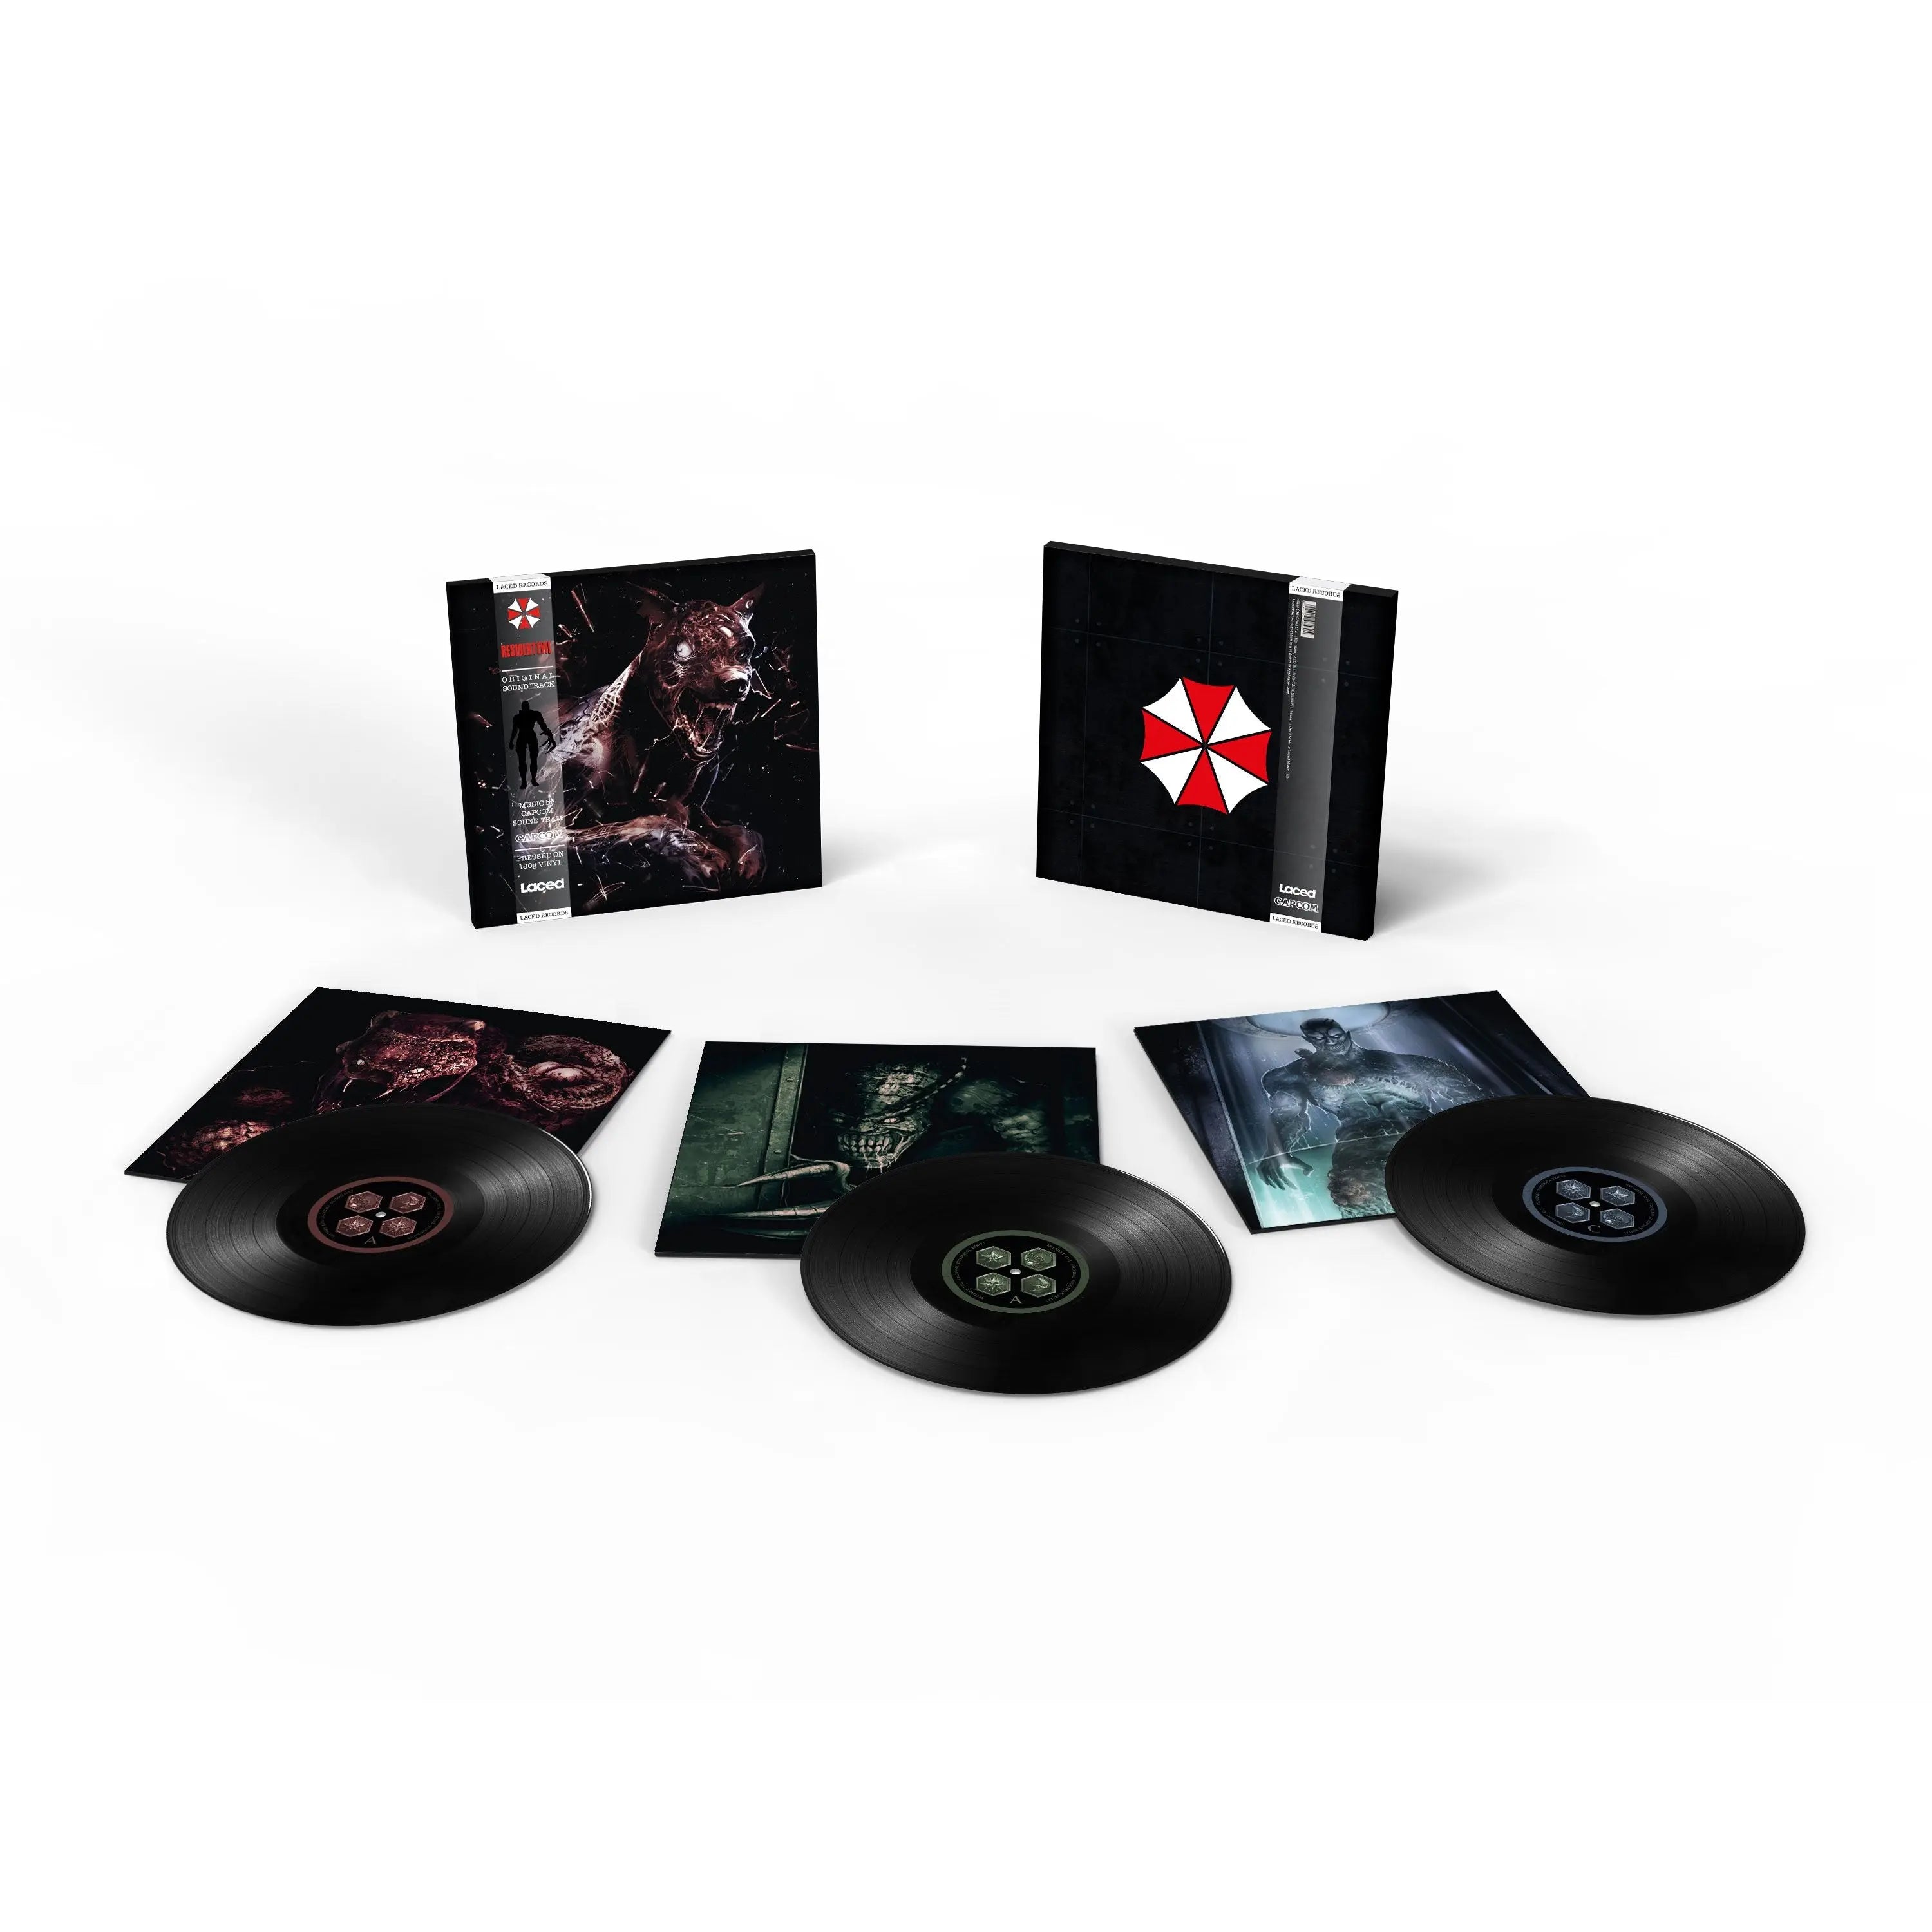 Soundtrack remix. 20 Years of Resident Evil.